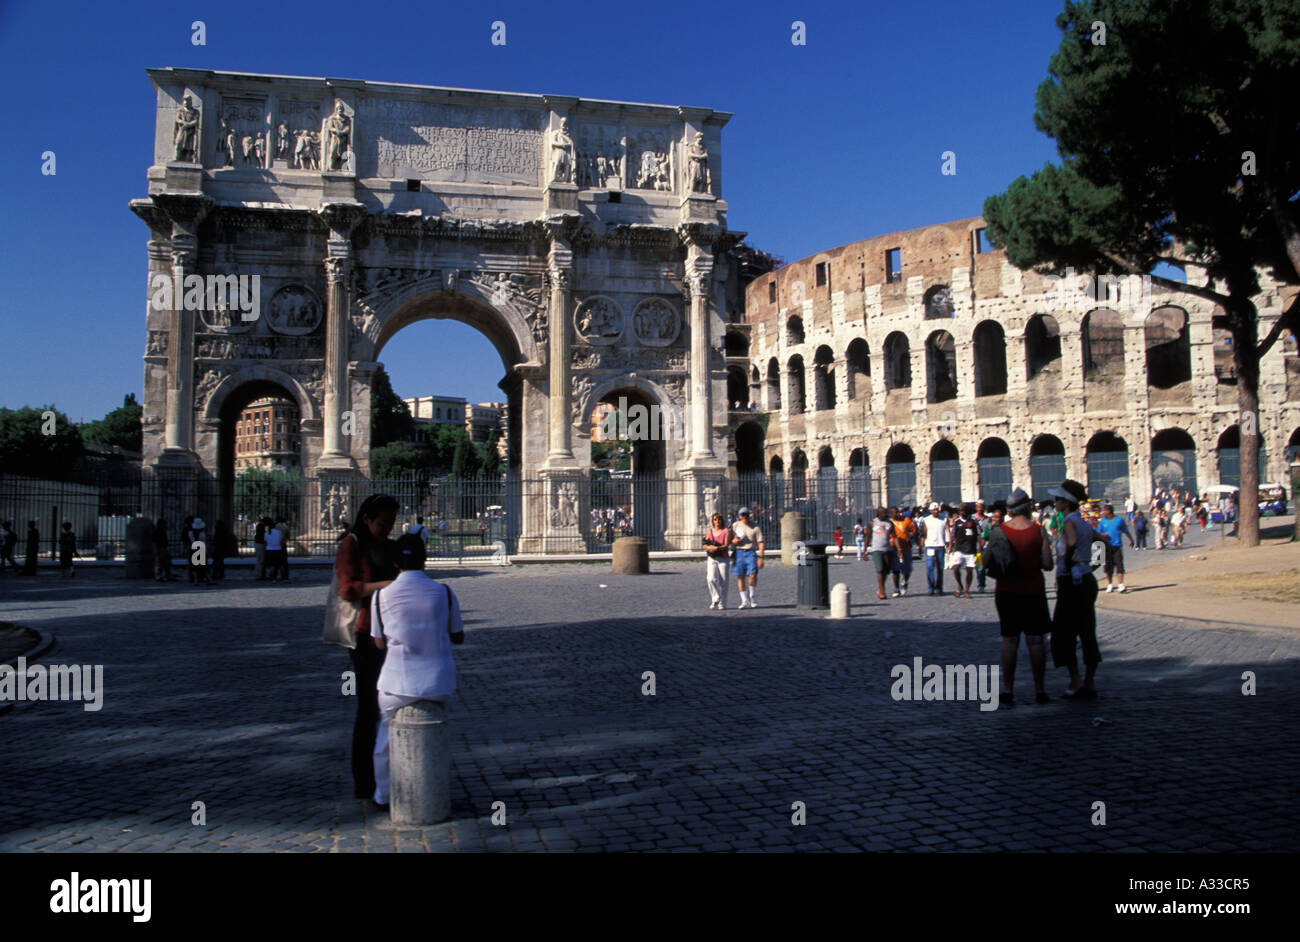 The Arch of Constantine and the Colosseum, Rome, Italy Stock Photo